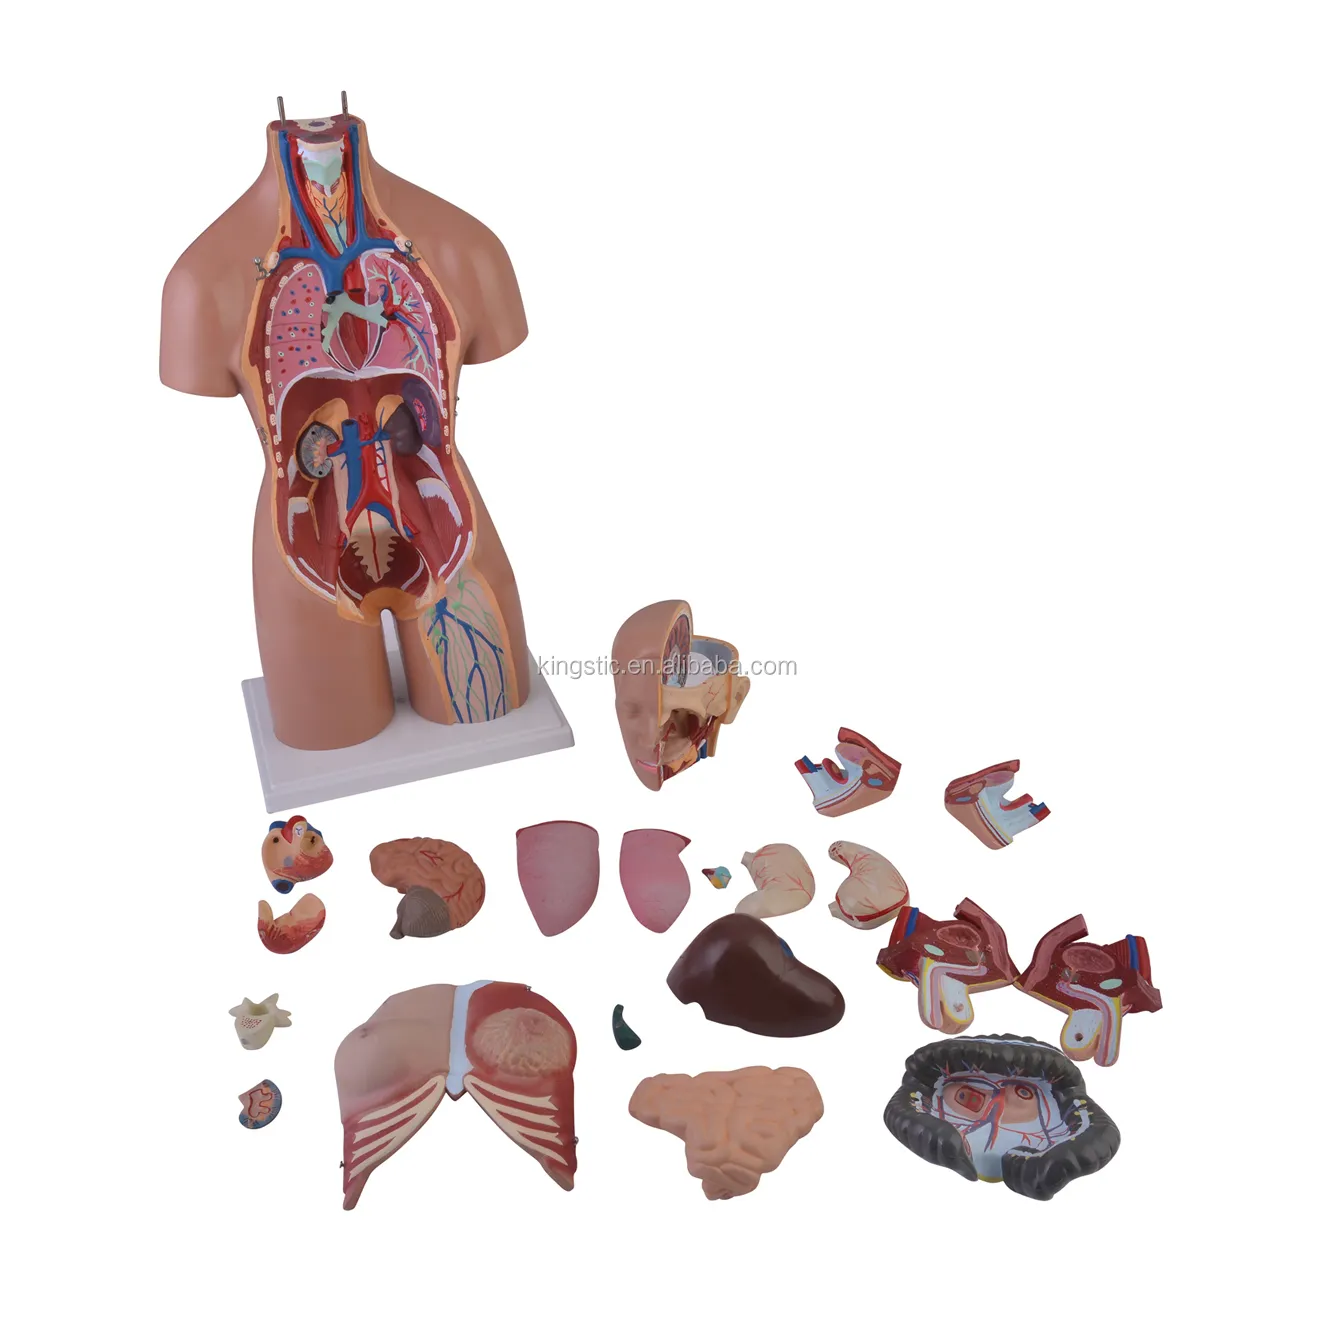 Kingstic natural size medical educational anatomy model with stand